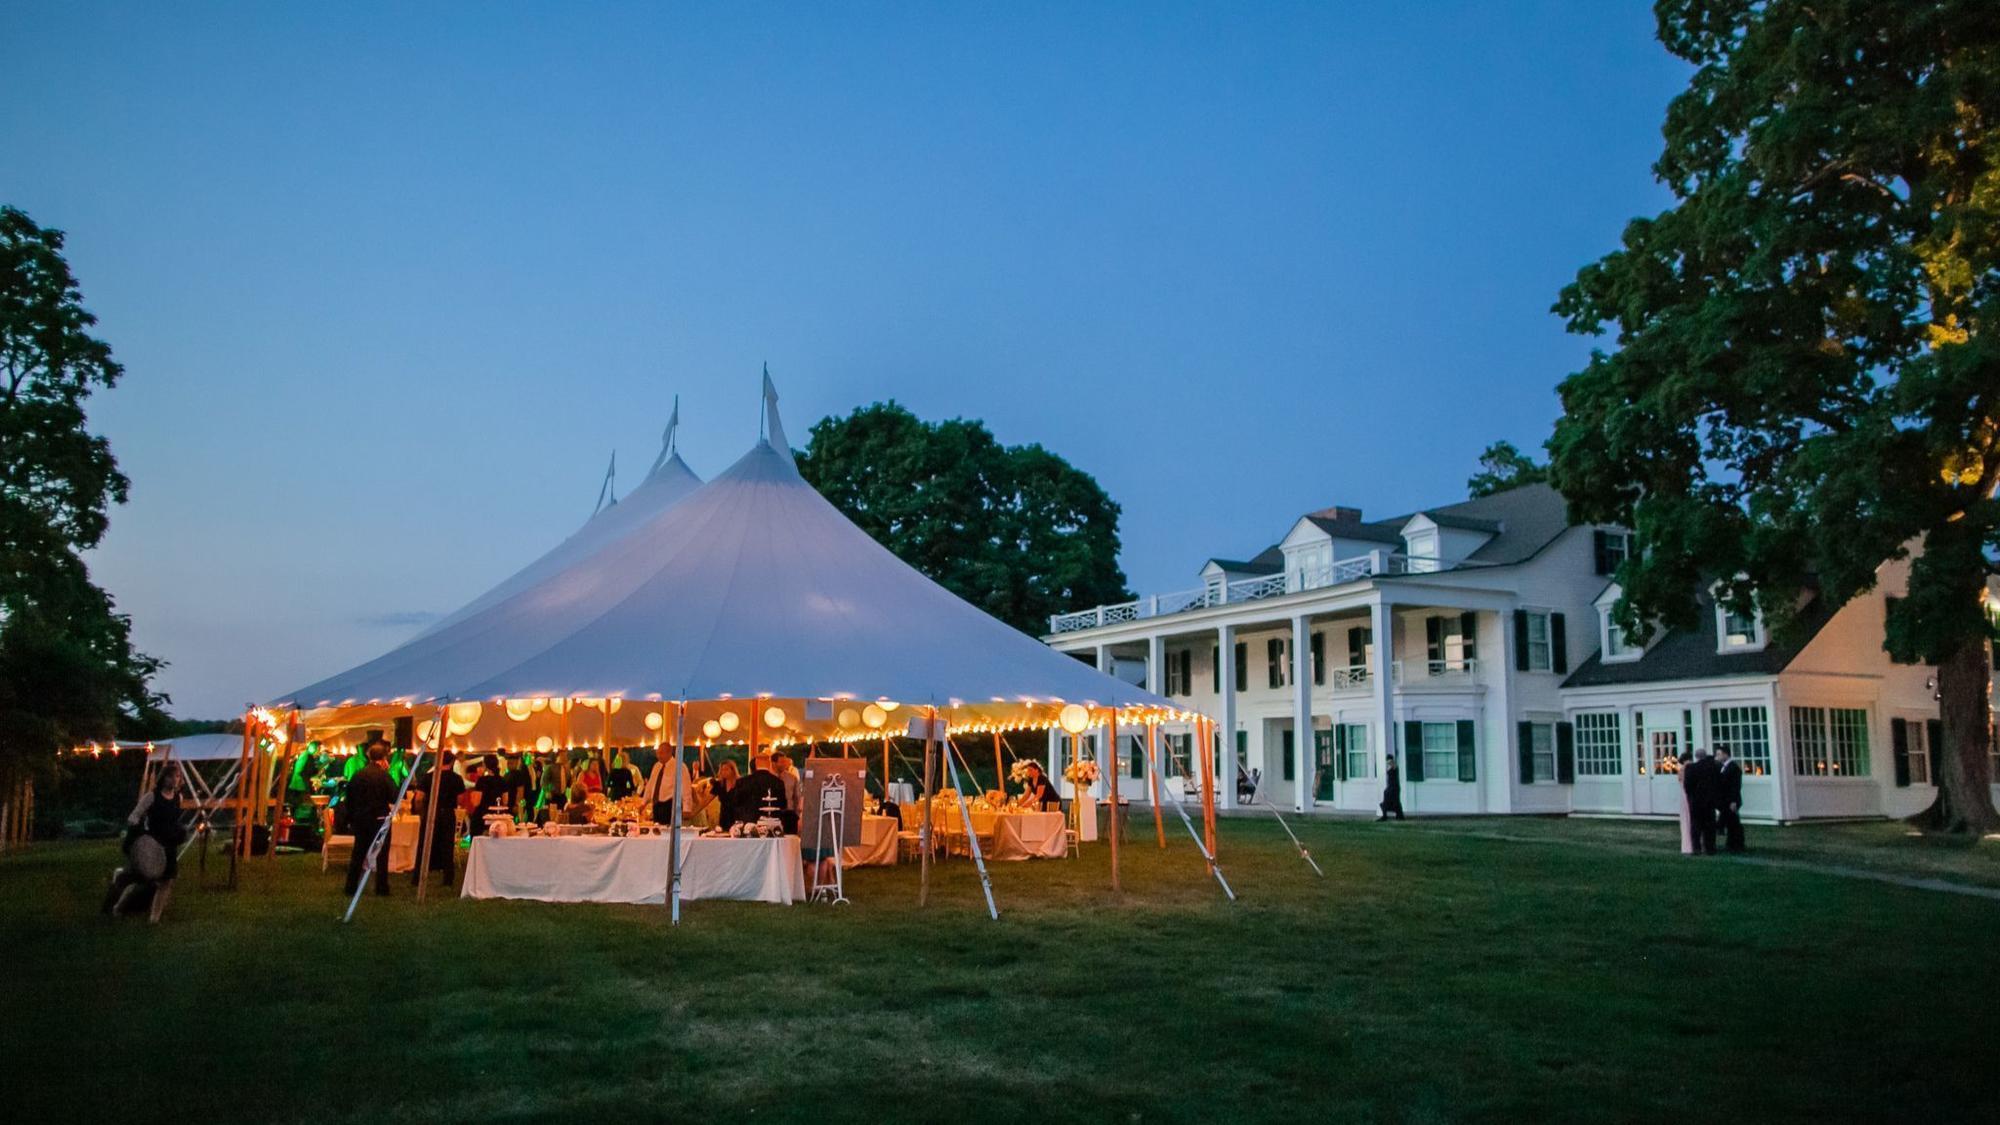 Outdoor Weddings Tented Celebrations At Farms Vineyards Museums